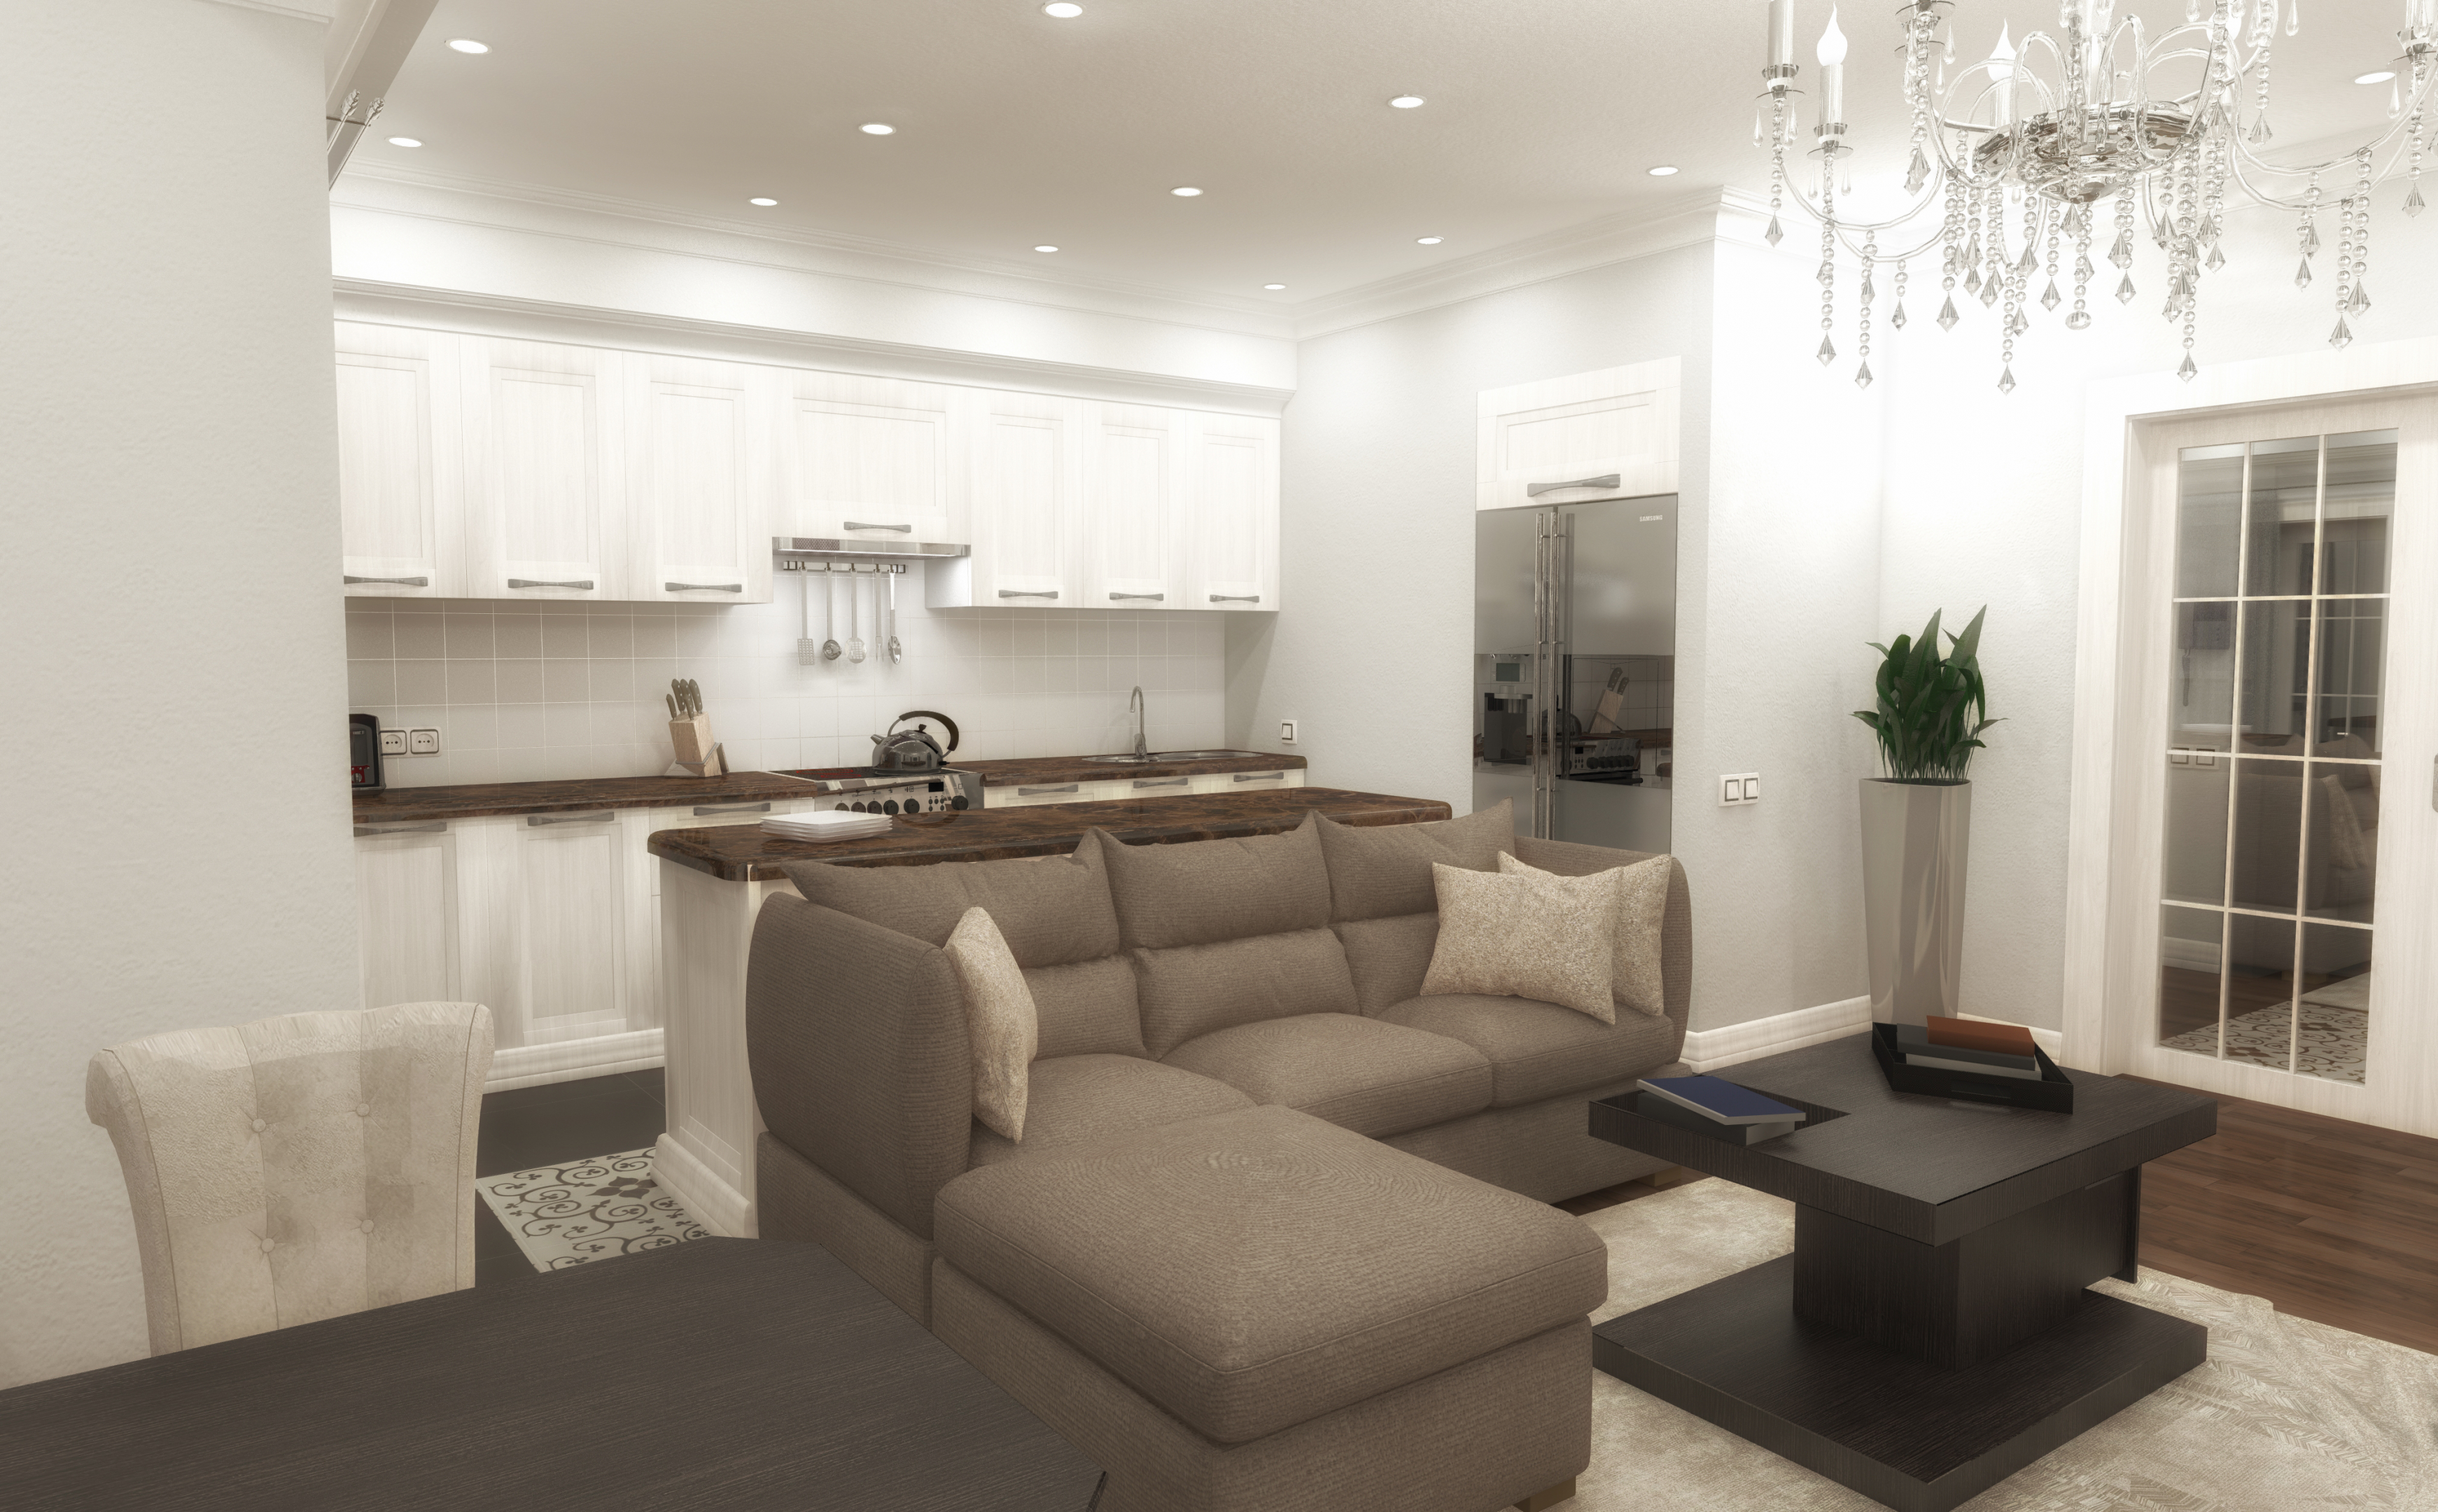 Interior design project LCD Spring, Almaty in ArchiCAD maxwell render image